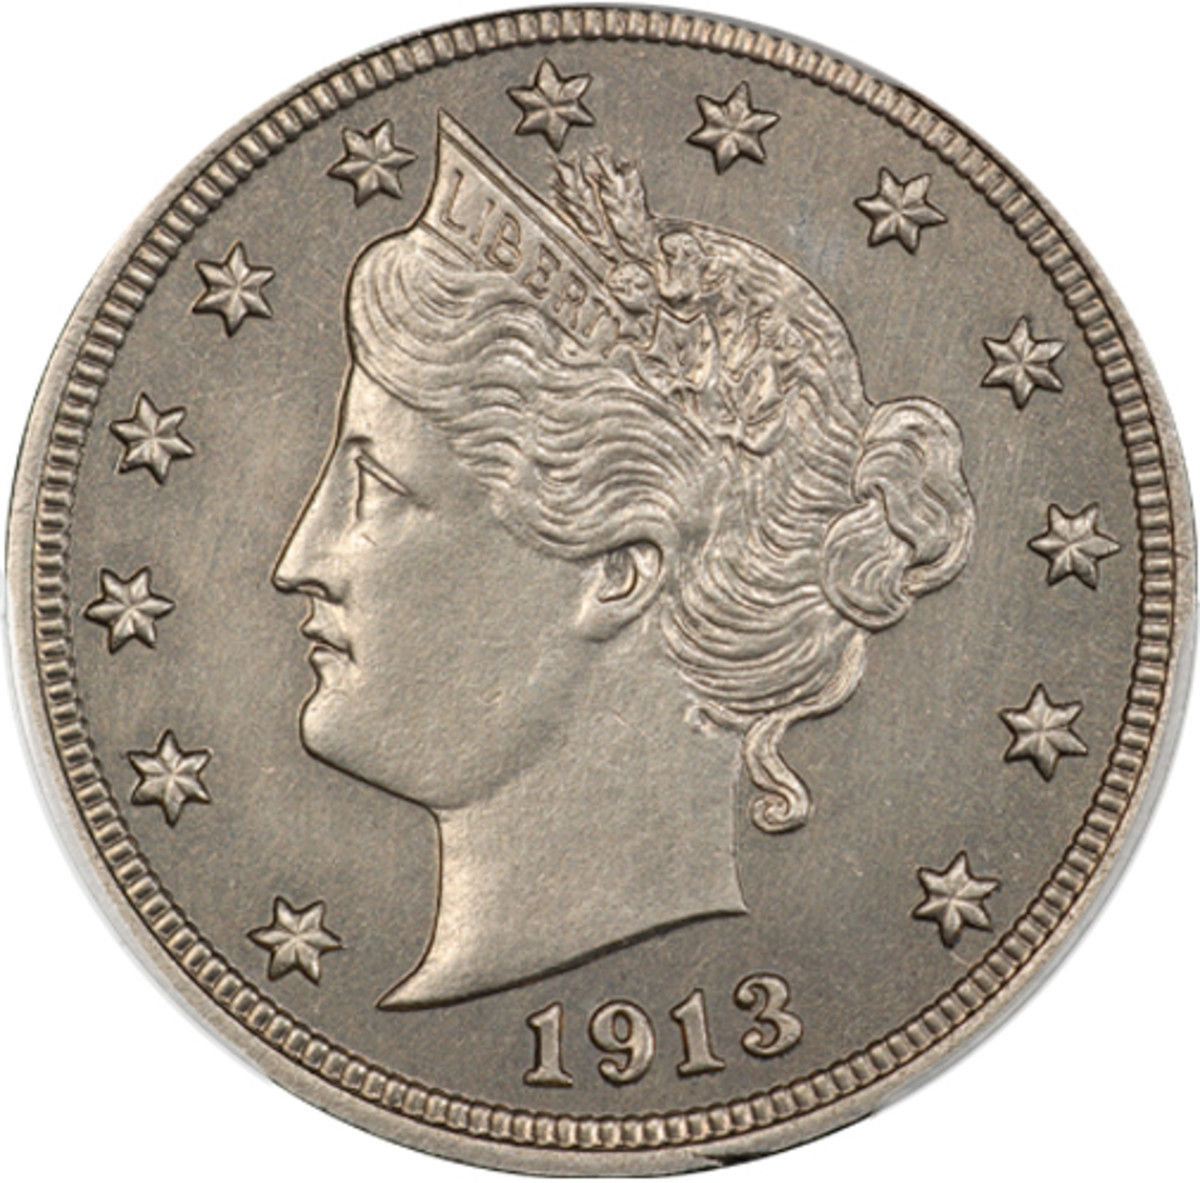 The finest known example of the 1913 Liberty Head nickel was the crown jewel of the “Thanksgiving Trio” sale that totaled $13.35 million on Nov. 25. (All images courtesy GreatCollections.)